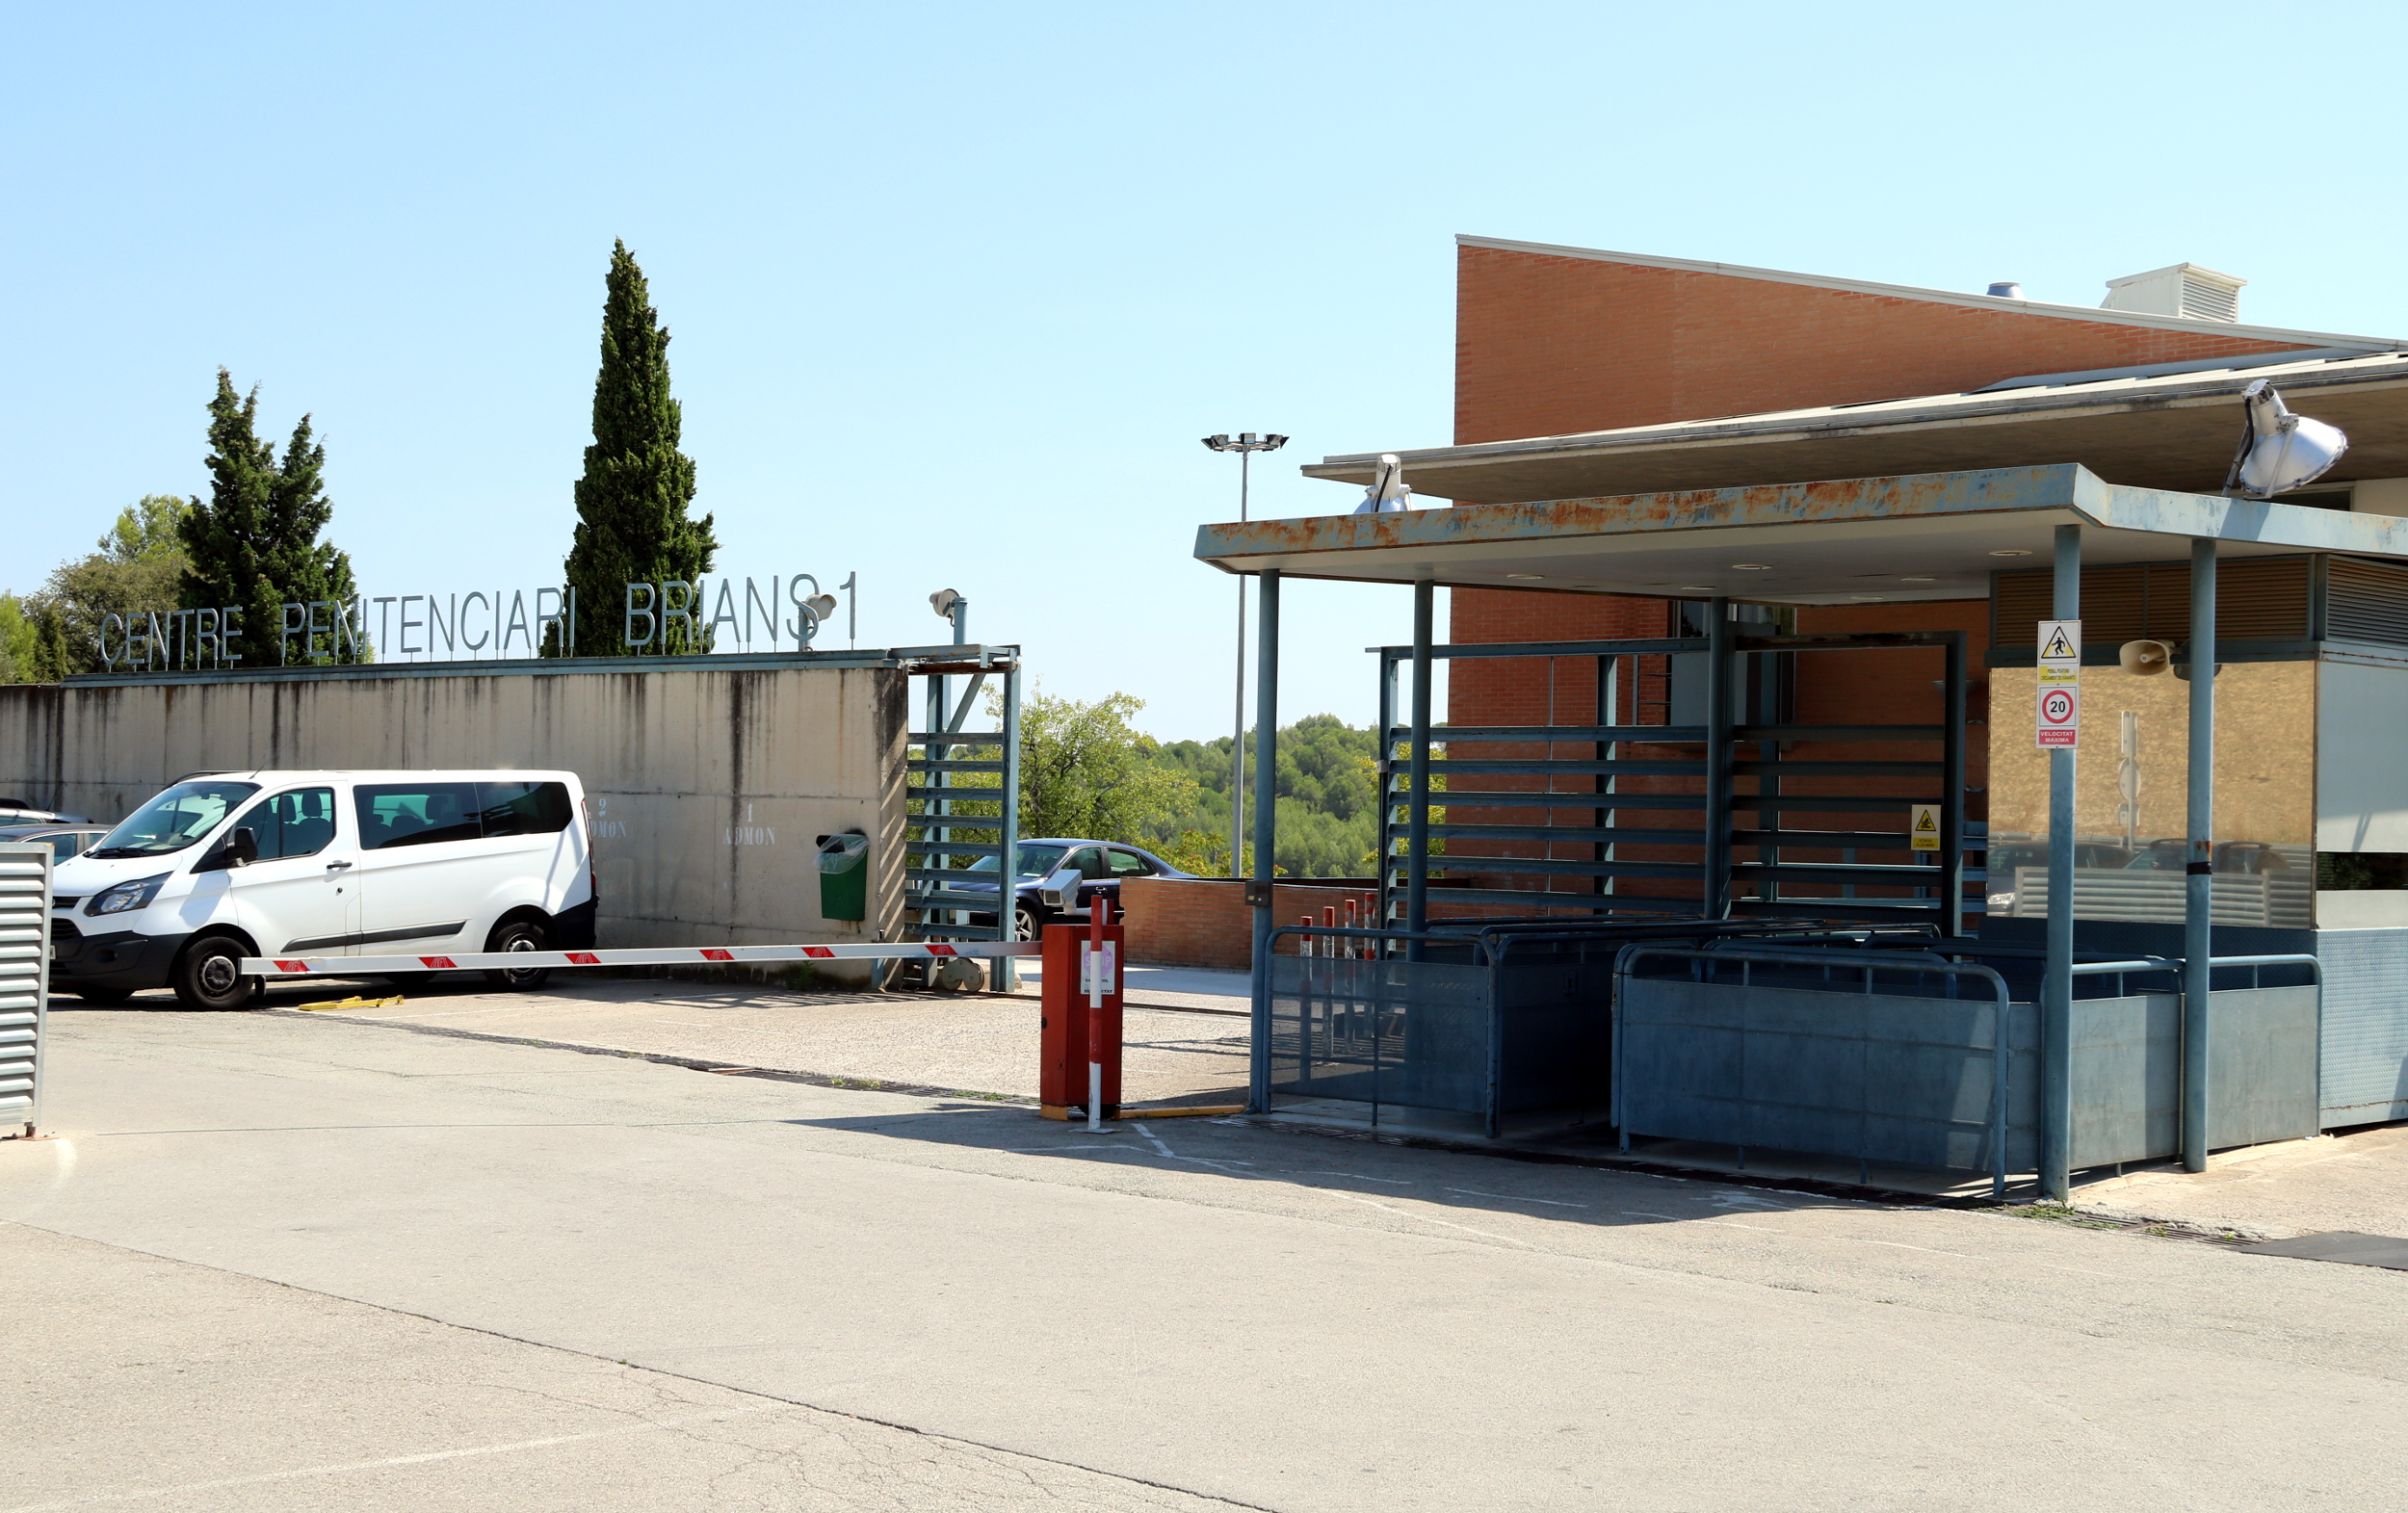 Outside the Brians I prison near Barcelona (by ACN)